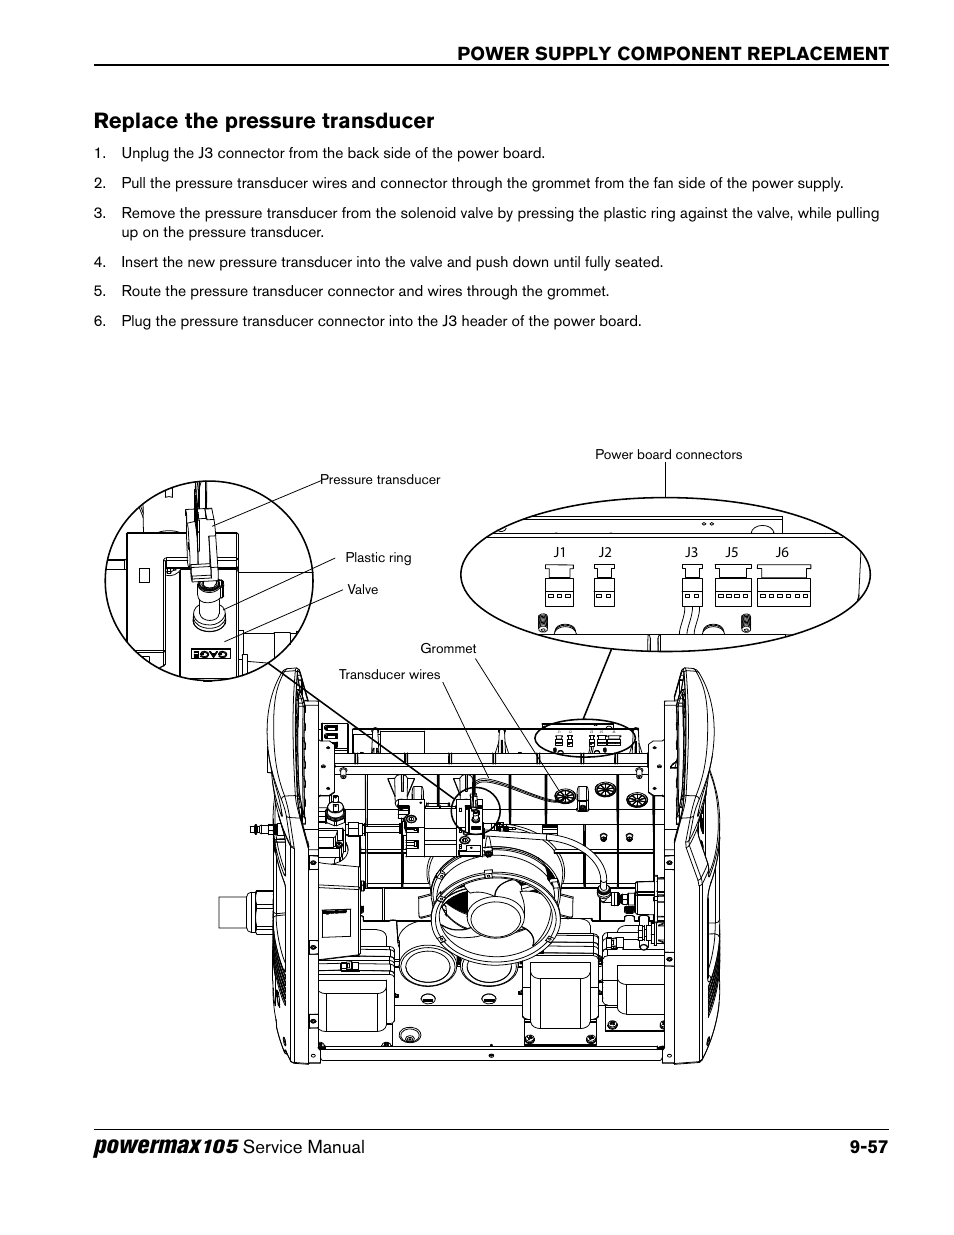 Replace the pressure transducer, Powermax, Power supply component  replacement | Hypertherm Powermax105 Service Manual User Manual | Page 255  / 343  Hypertherm Powermax 85 Wiring Diagram    Manuals Directory